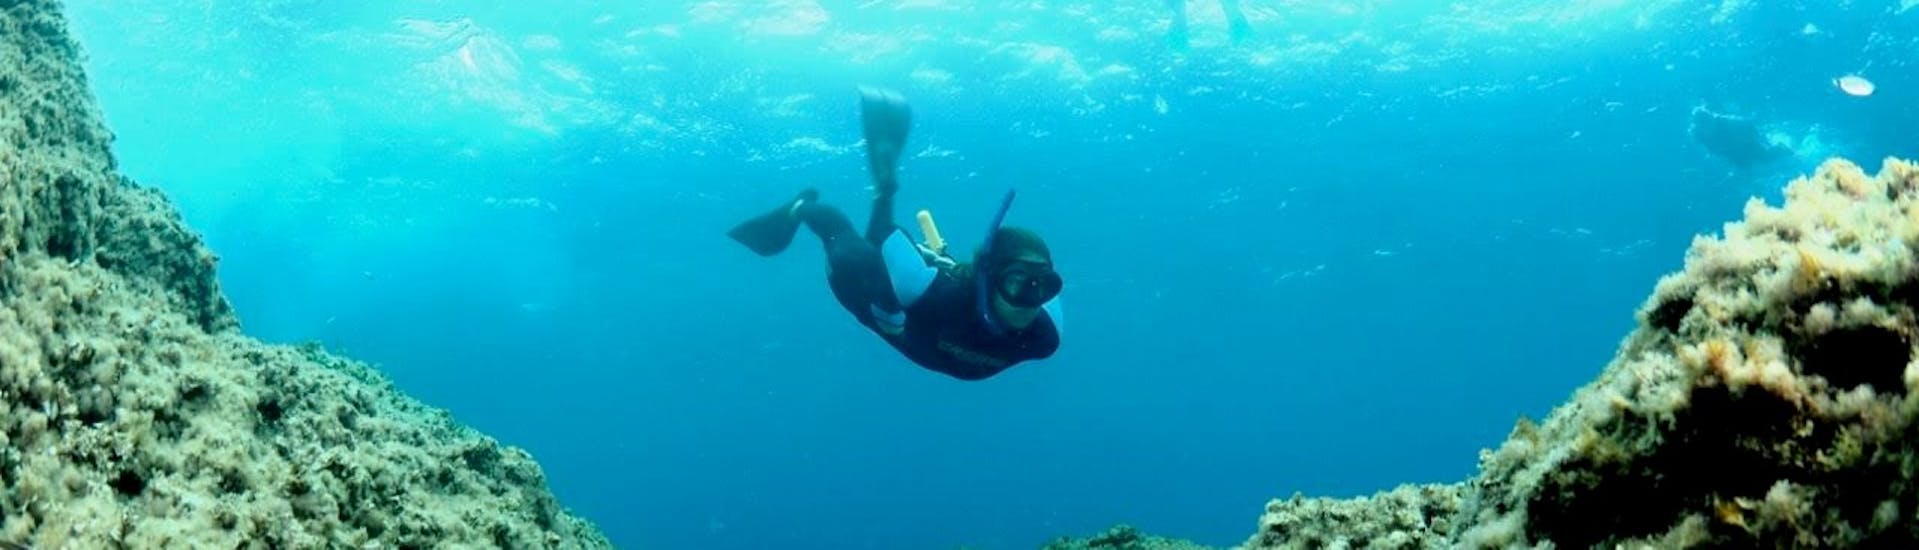 A snorkeler approaches to some rocks during our Snorkeling Tour in the Paraggi Bay in Portofino with Outdoor Portofino.